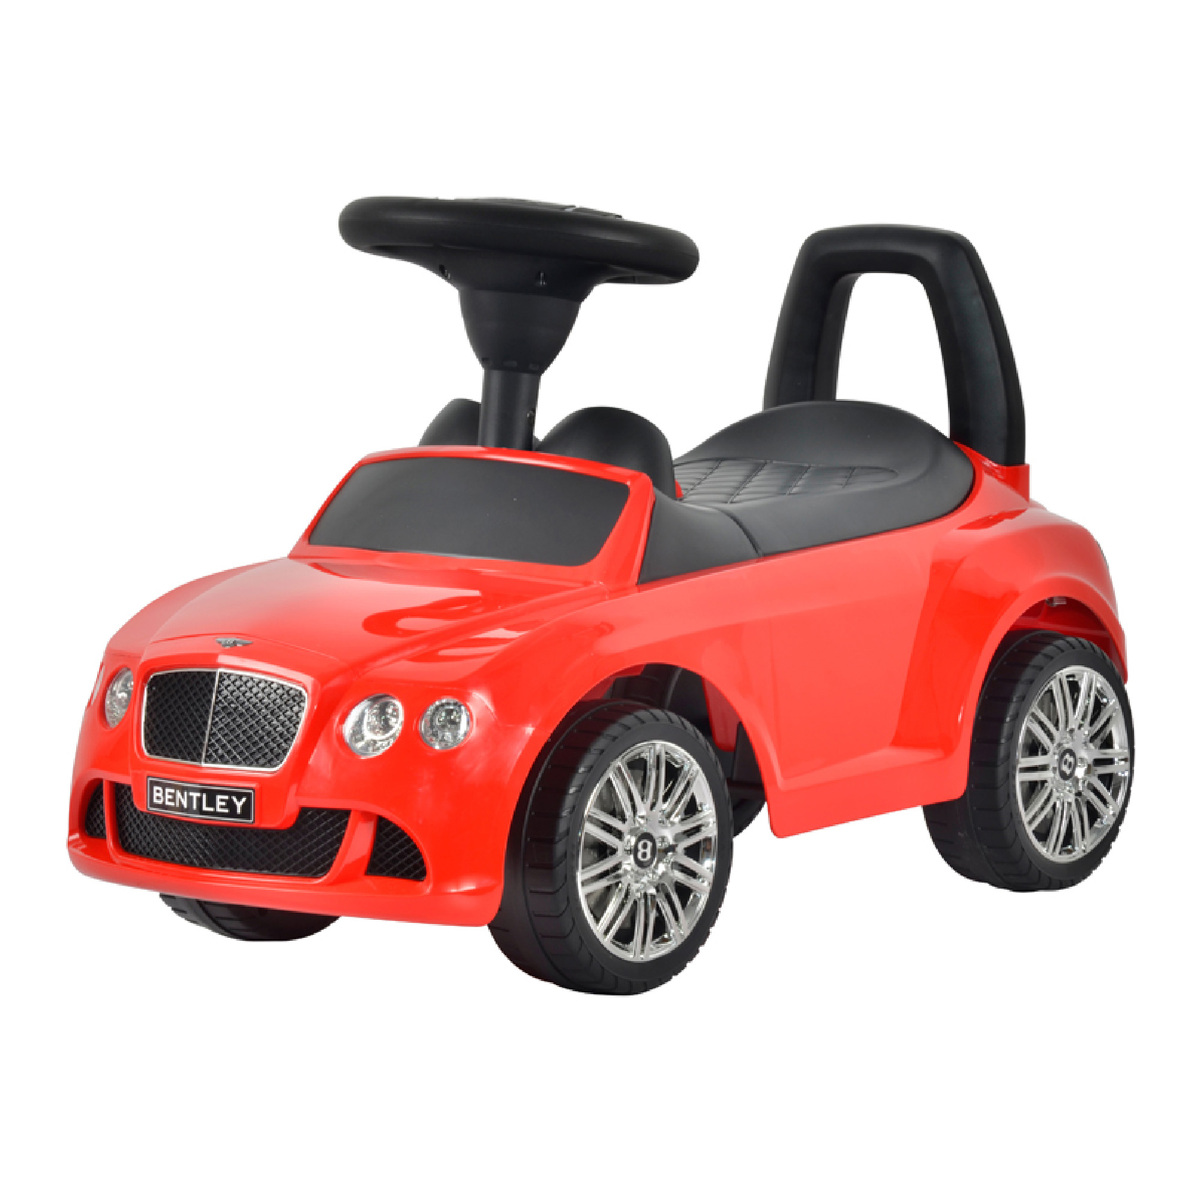 Bentley Baby Ride On Tolo Car Z326 Online at Best Price | Tri Cycle ...